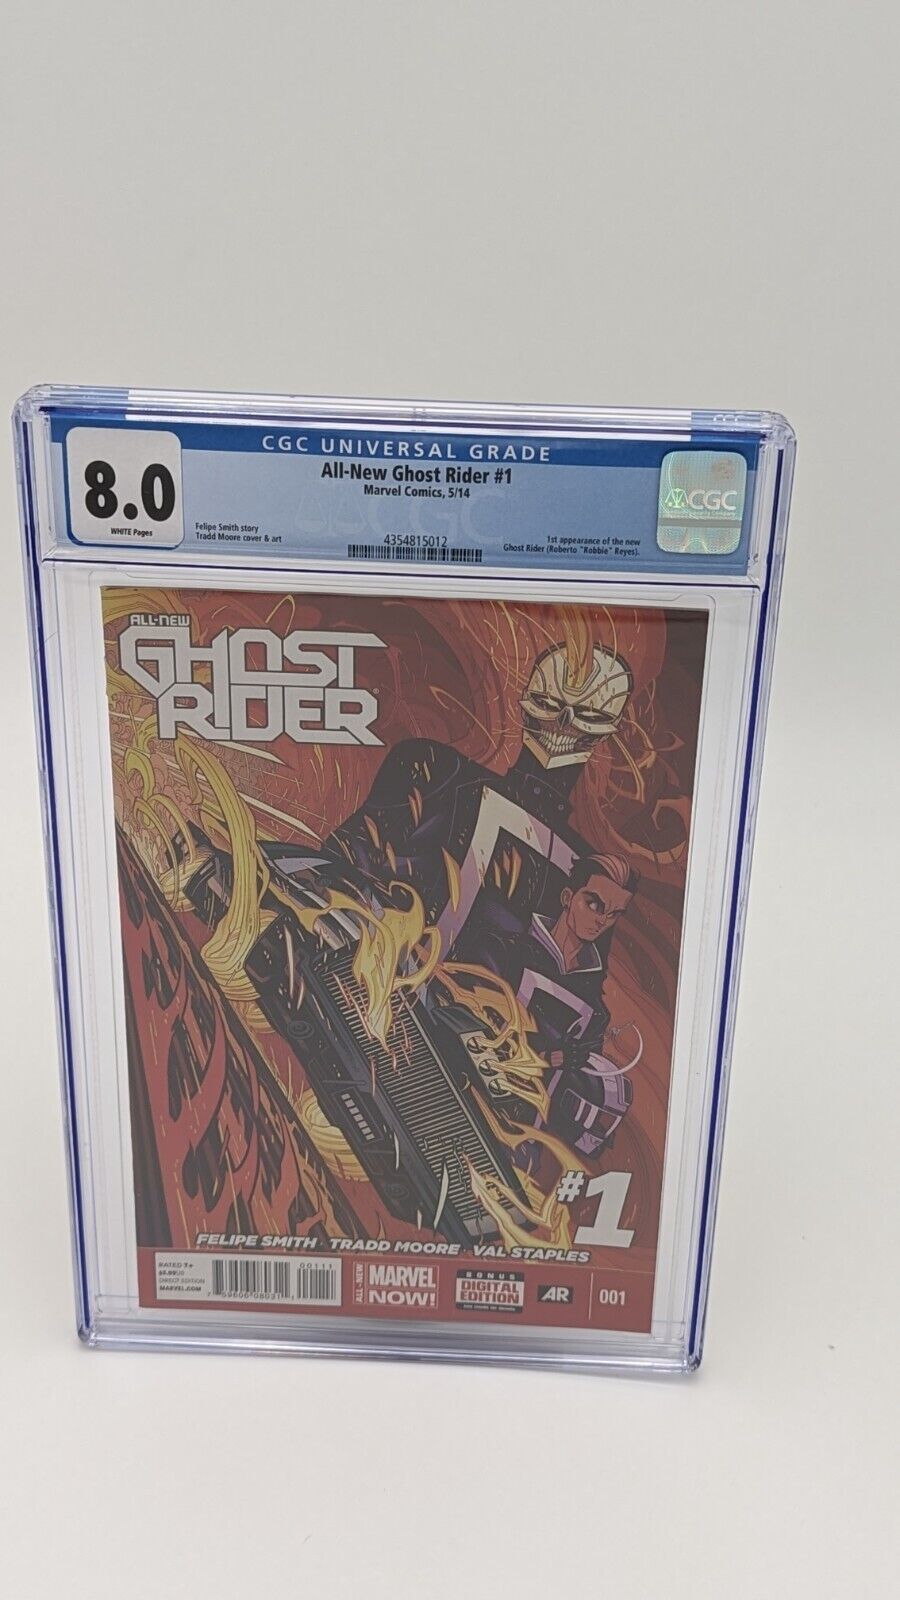 All-New Ghost Rider #1 CGC 8.0 Reyes 2014